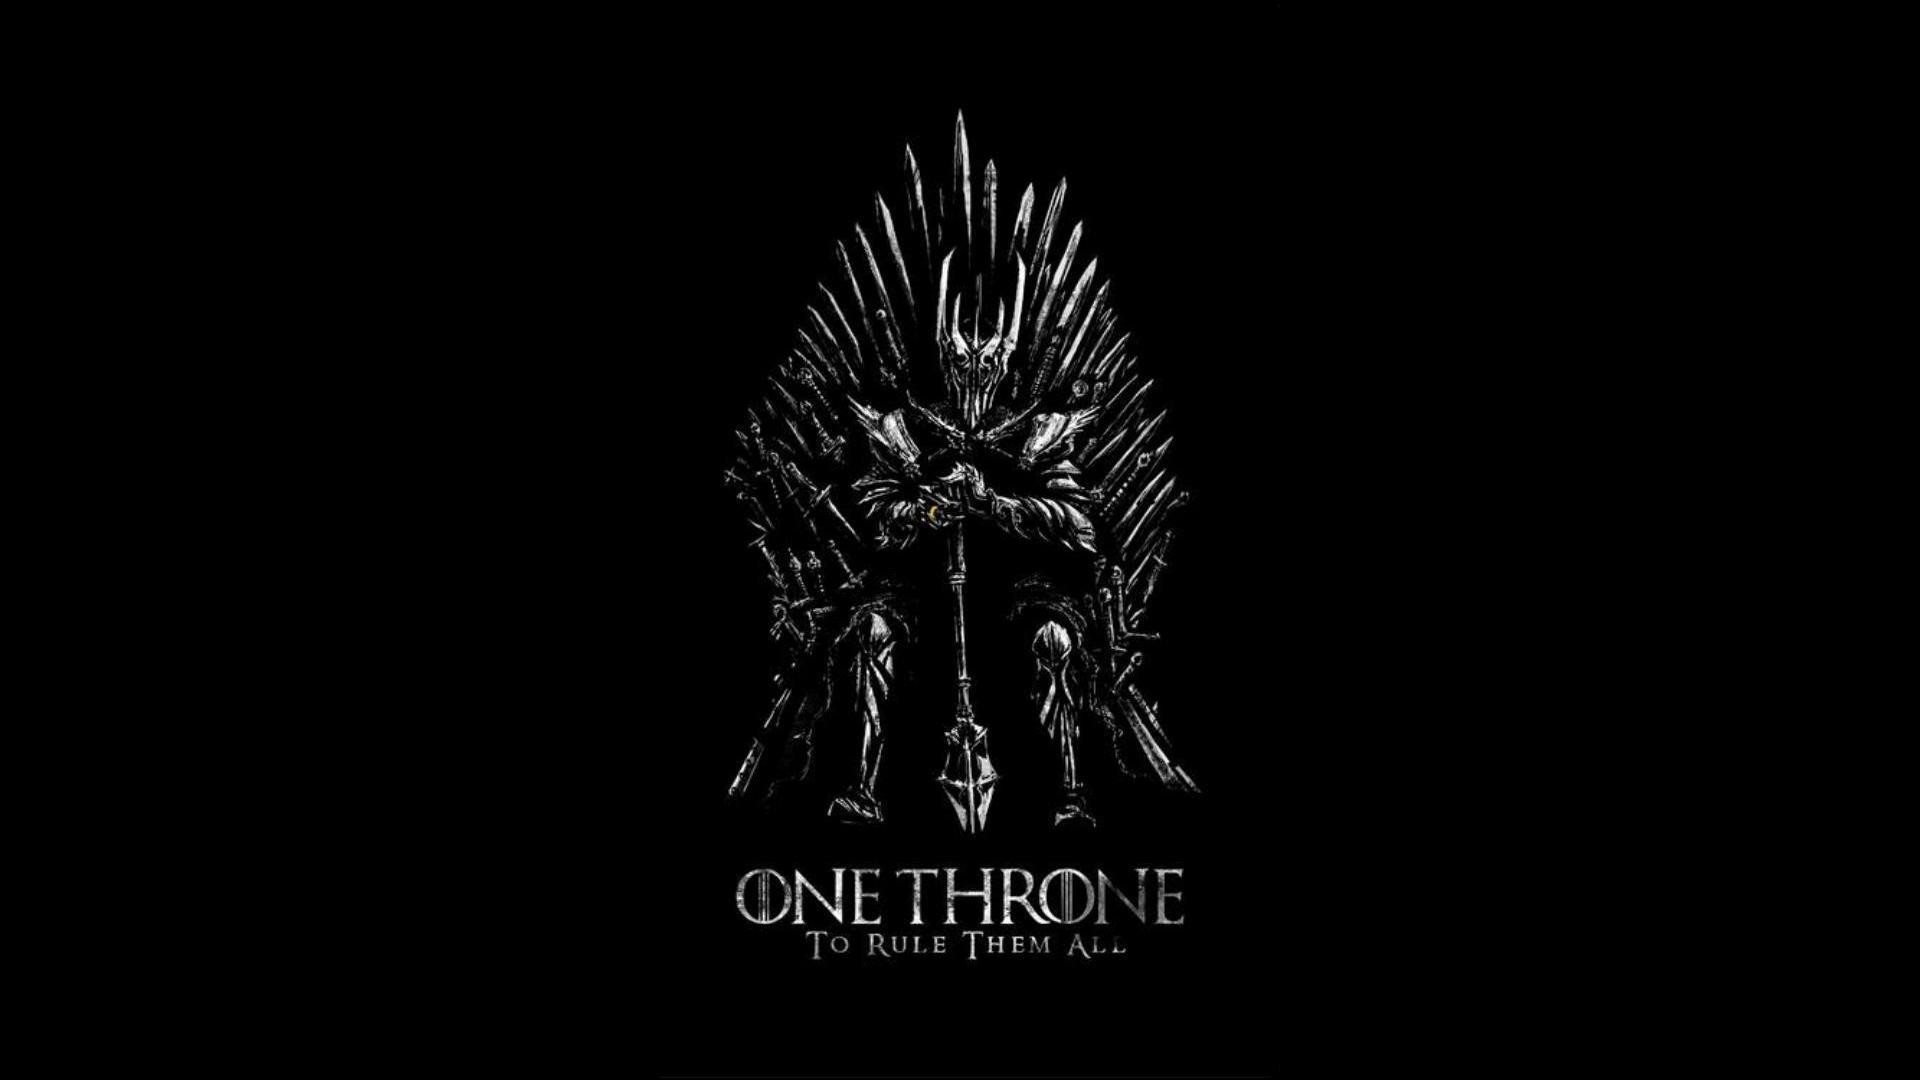 Iron Throne, Game Of Thrones, A Song Of Ice And Fire, The Lord Of The Rings, Sauron, Crossover Wallpaper